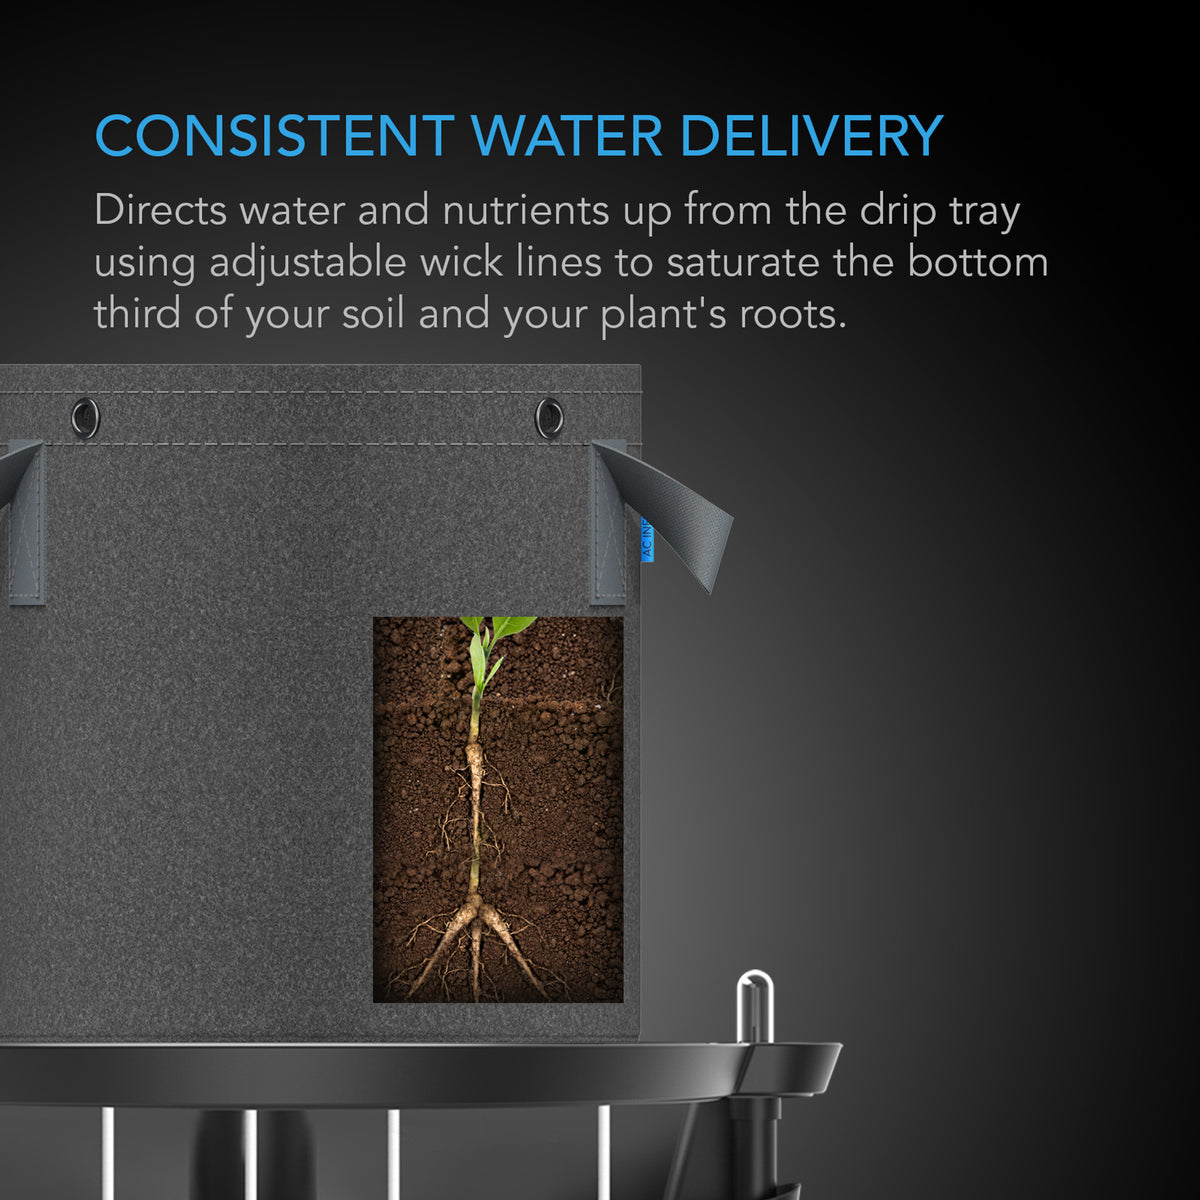  Consistent water delivery system, selfwatering pots